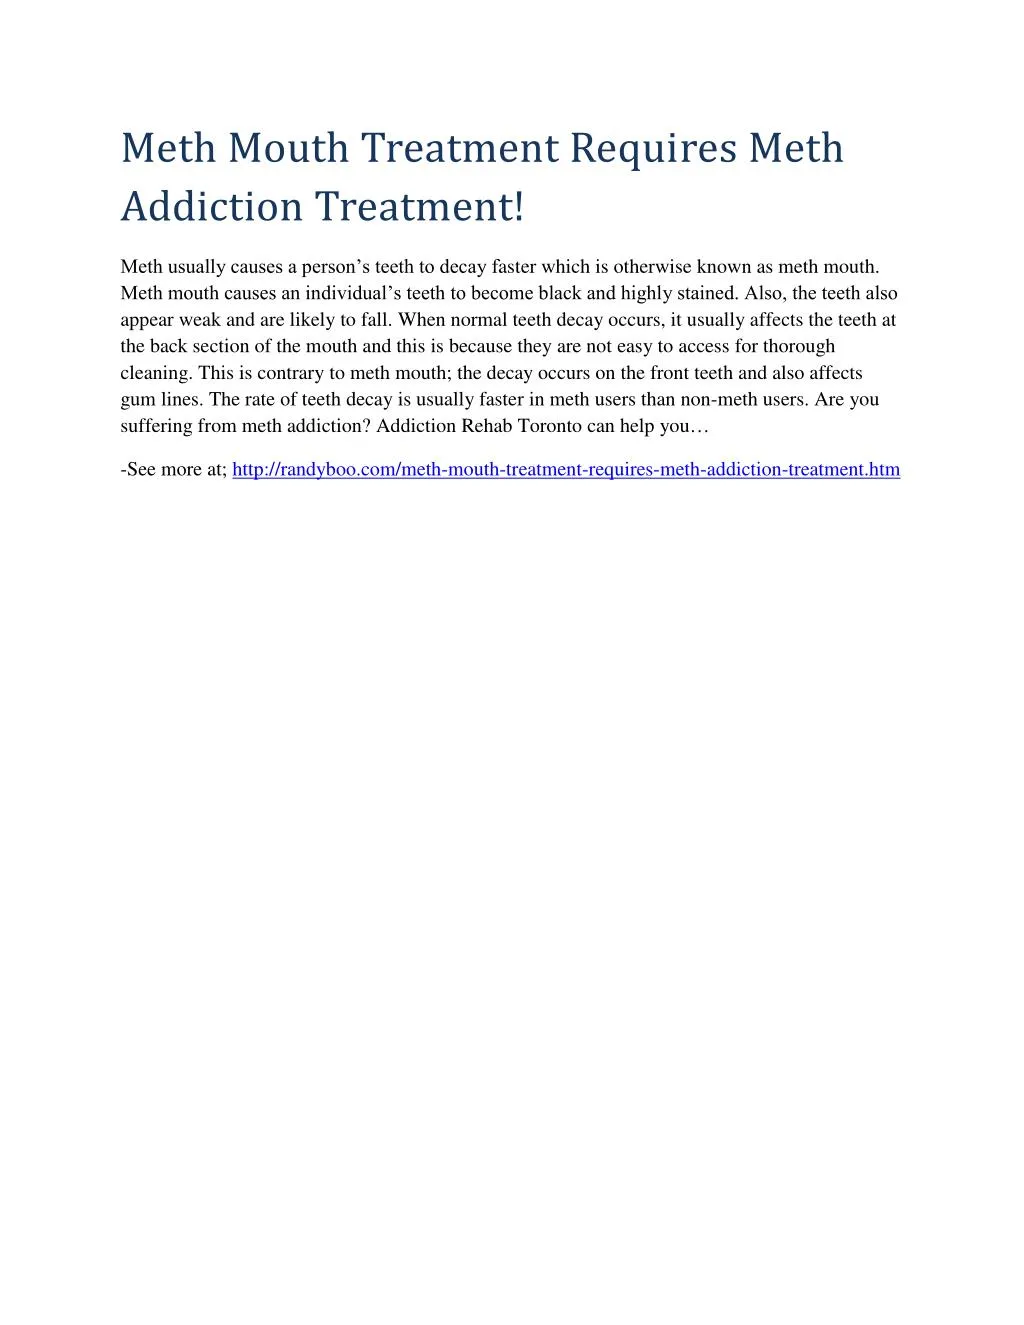 meth mouth treatment requires meth addiction